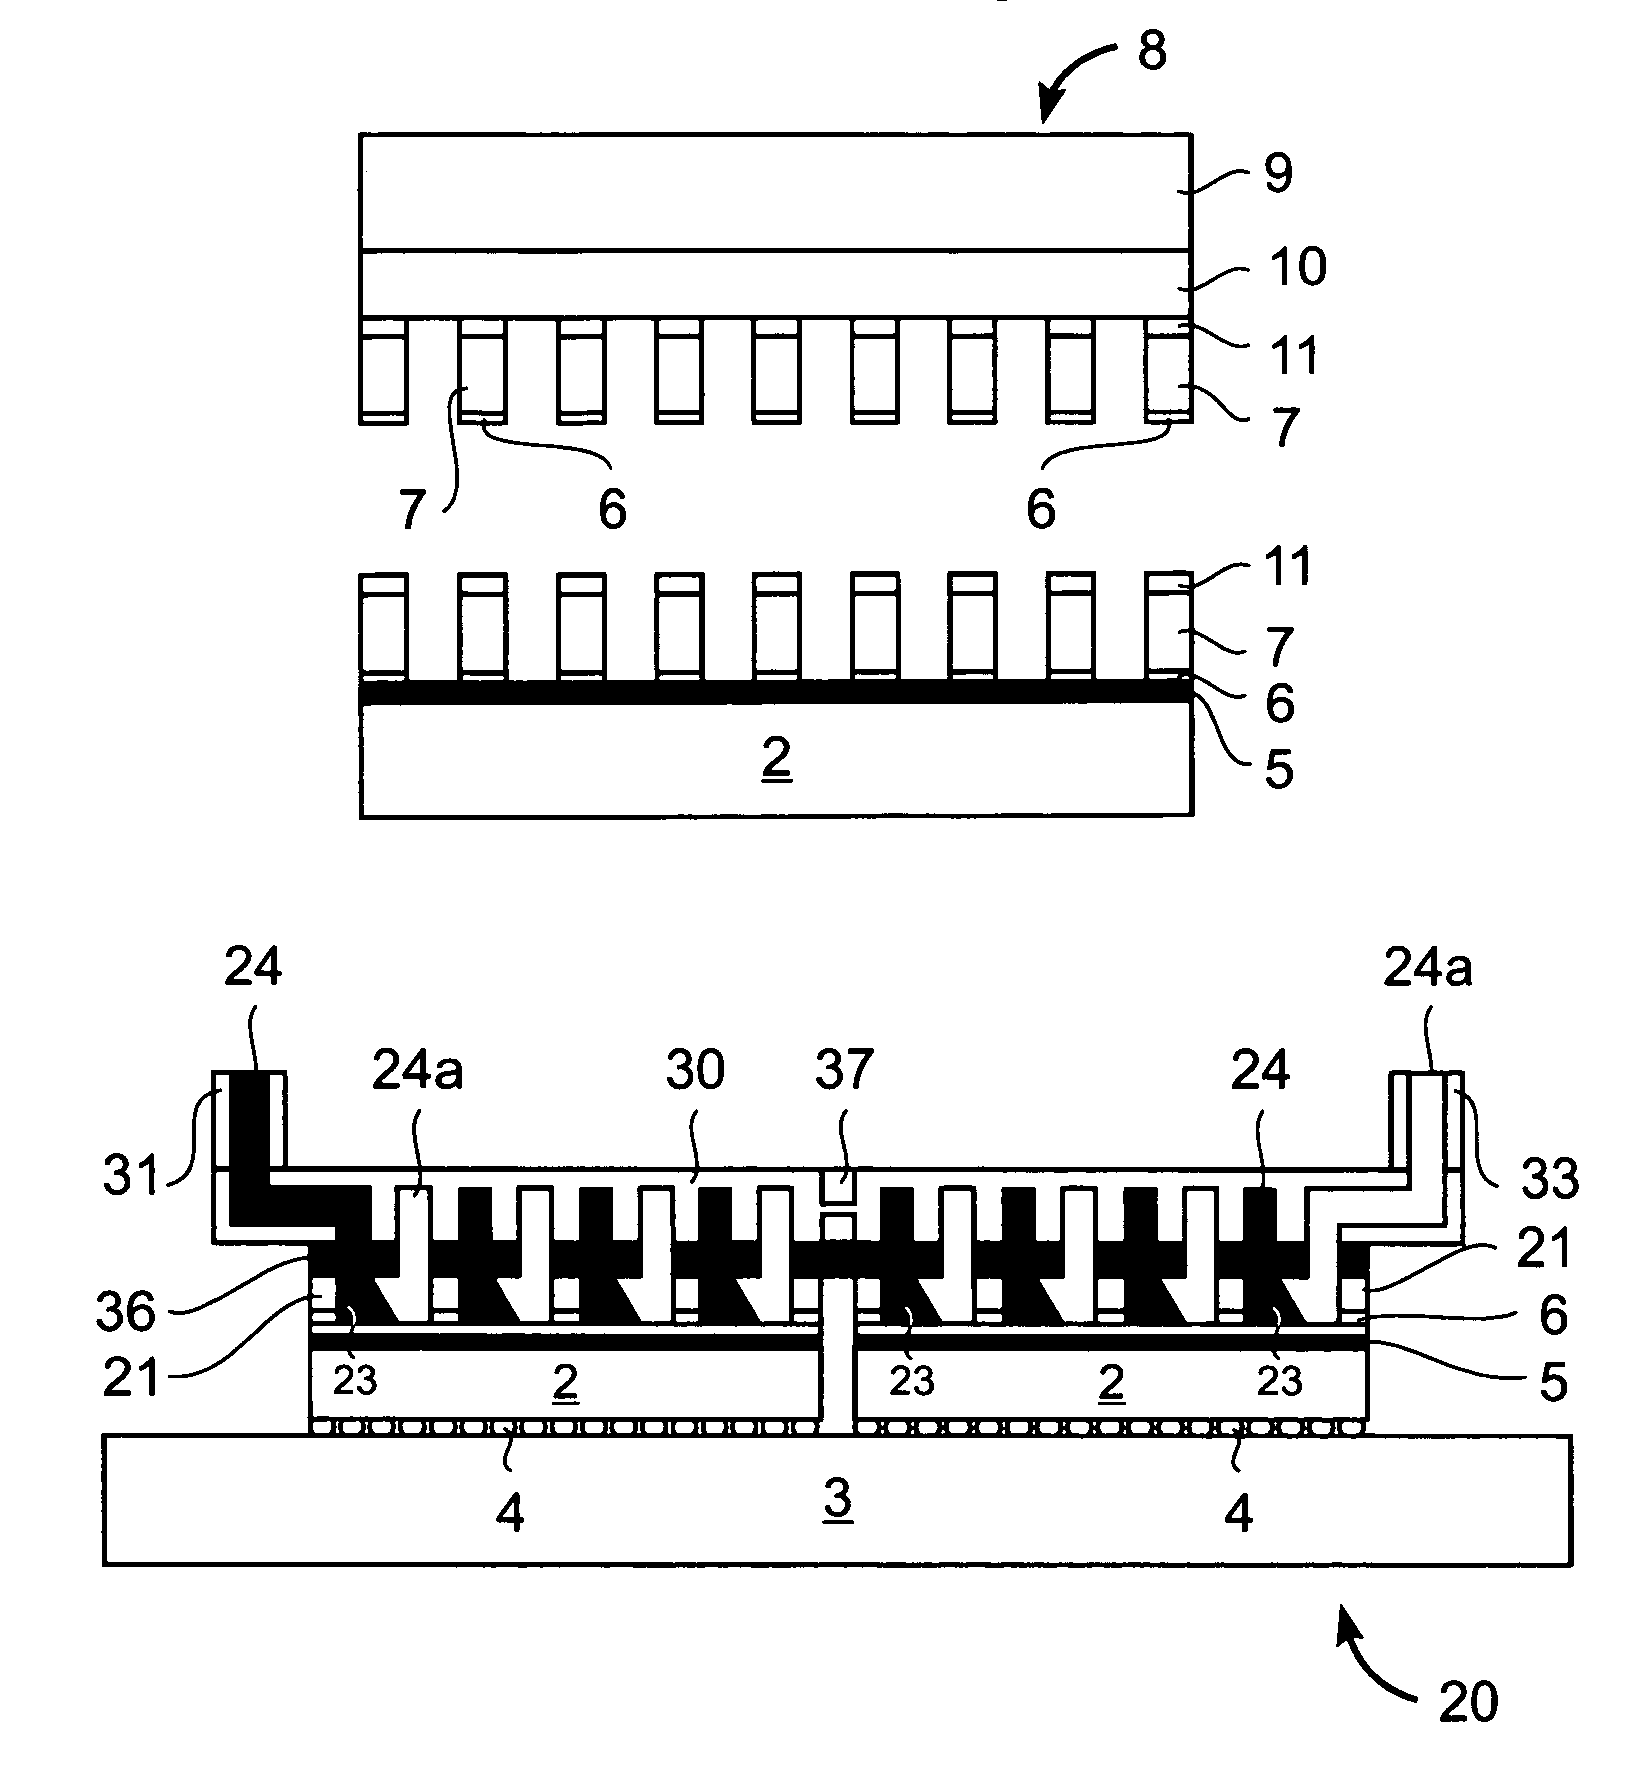 Semiconductor device with a high thermal dissipation efficiency